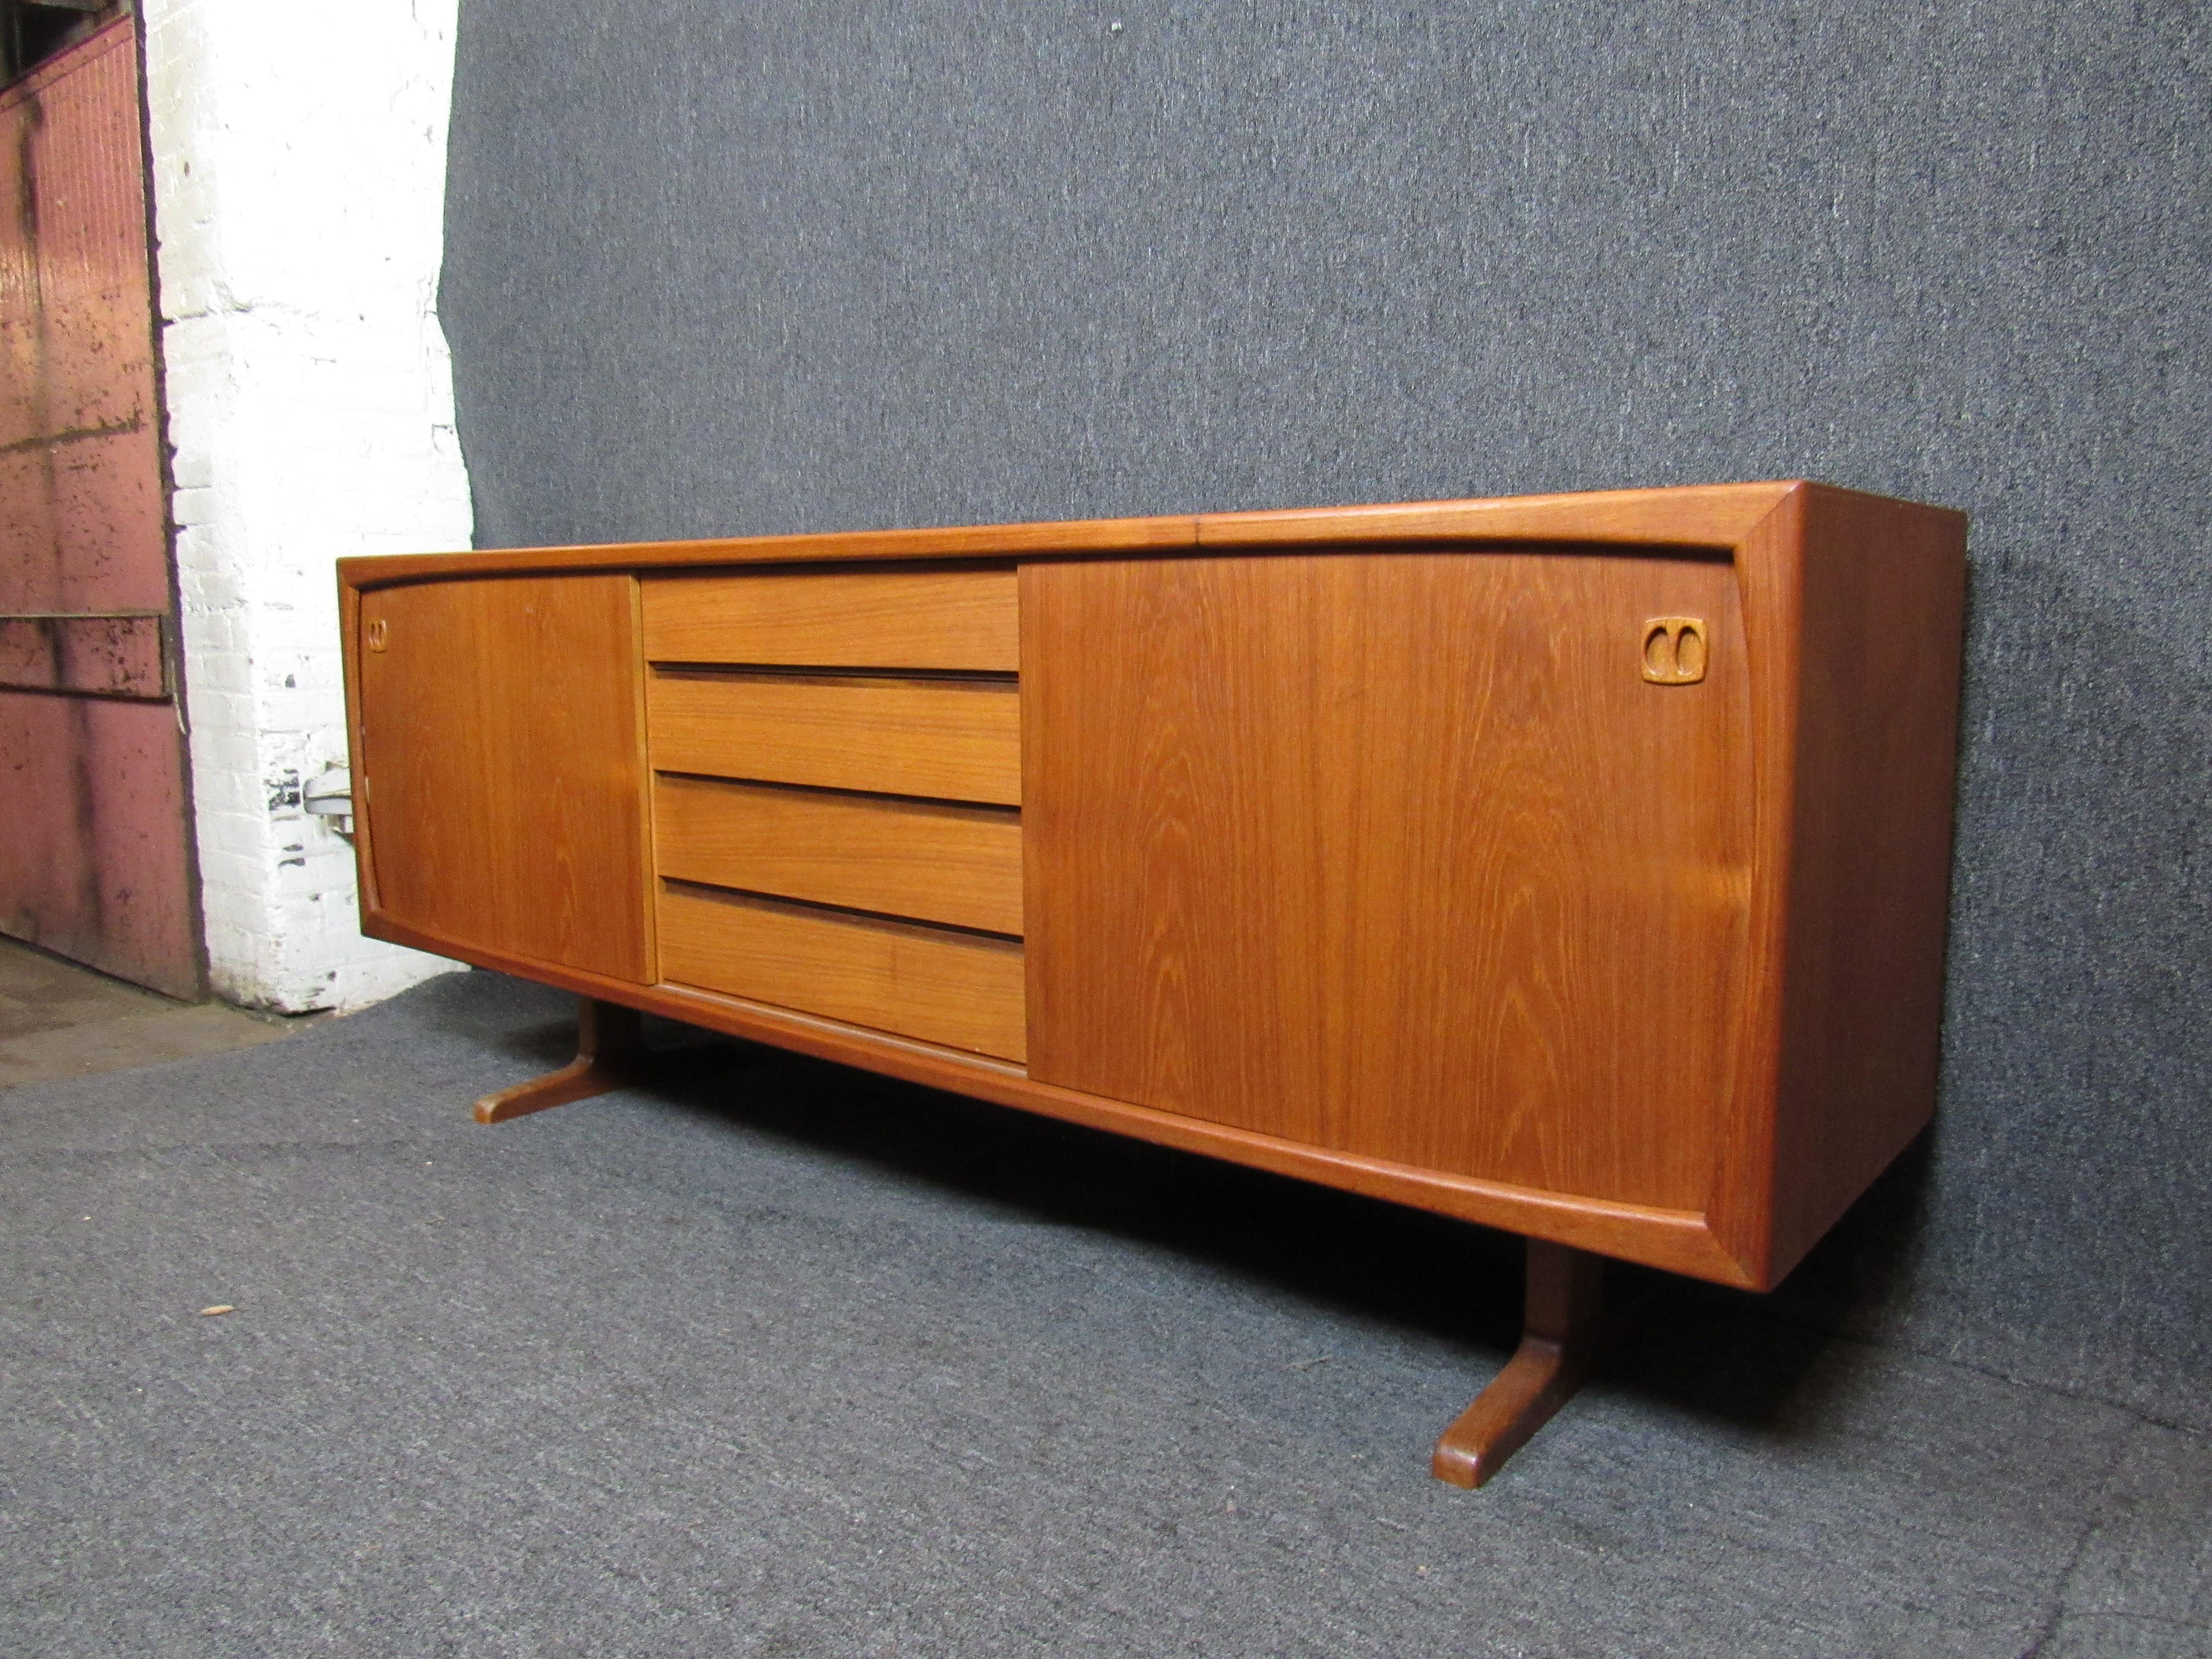 Mid-century modern teak credenza featuring sliding doors and four slim drawers in the center.

(Please confirm item location - NY or NJ - with dealer)